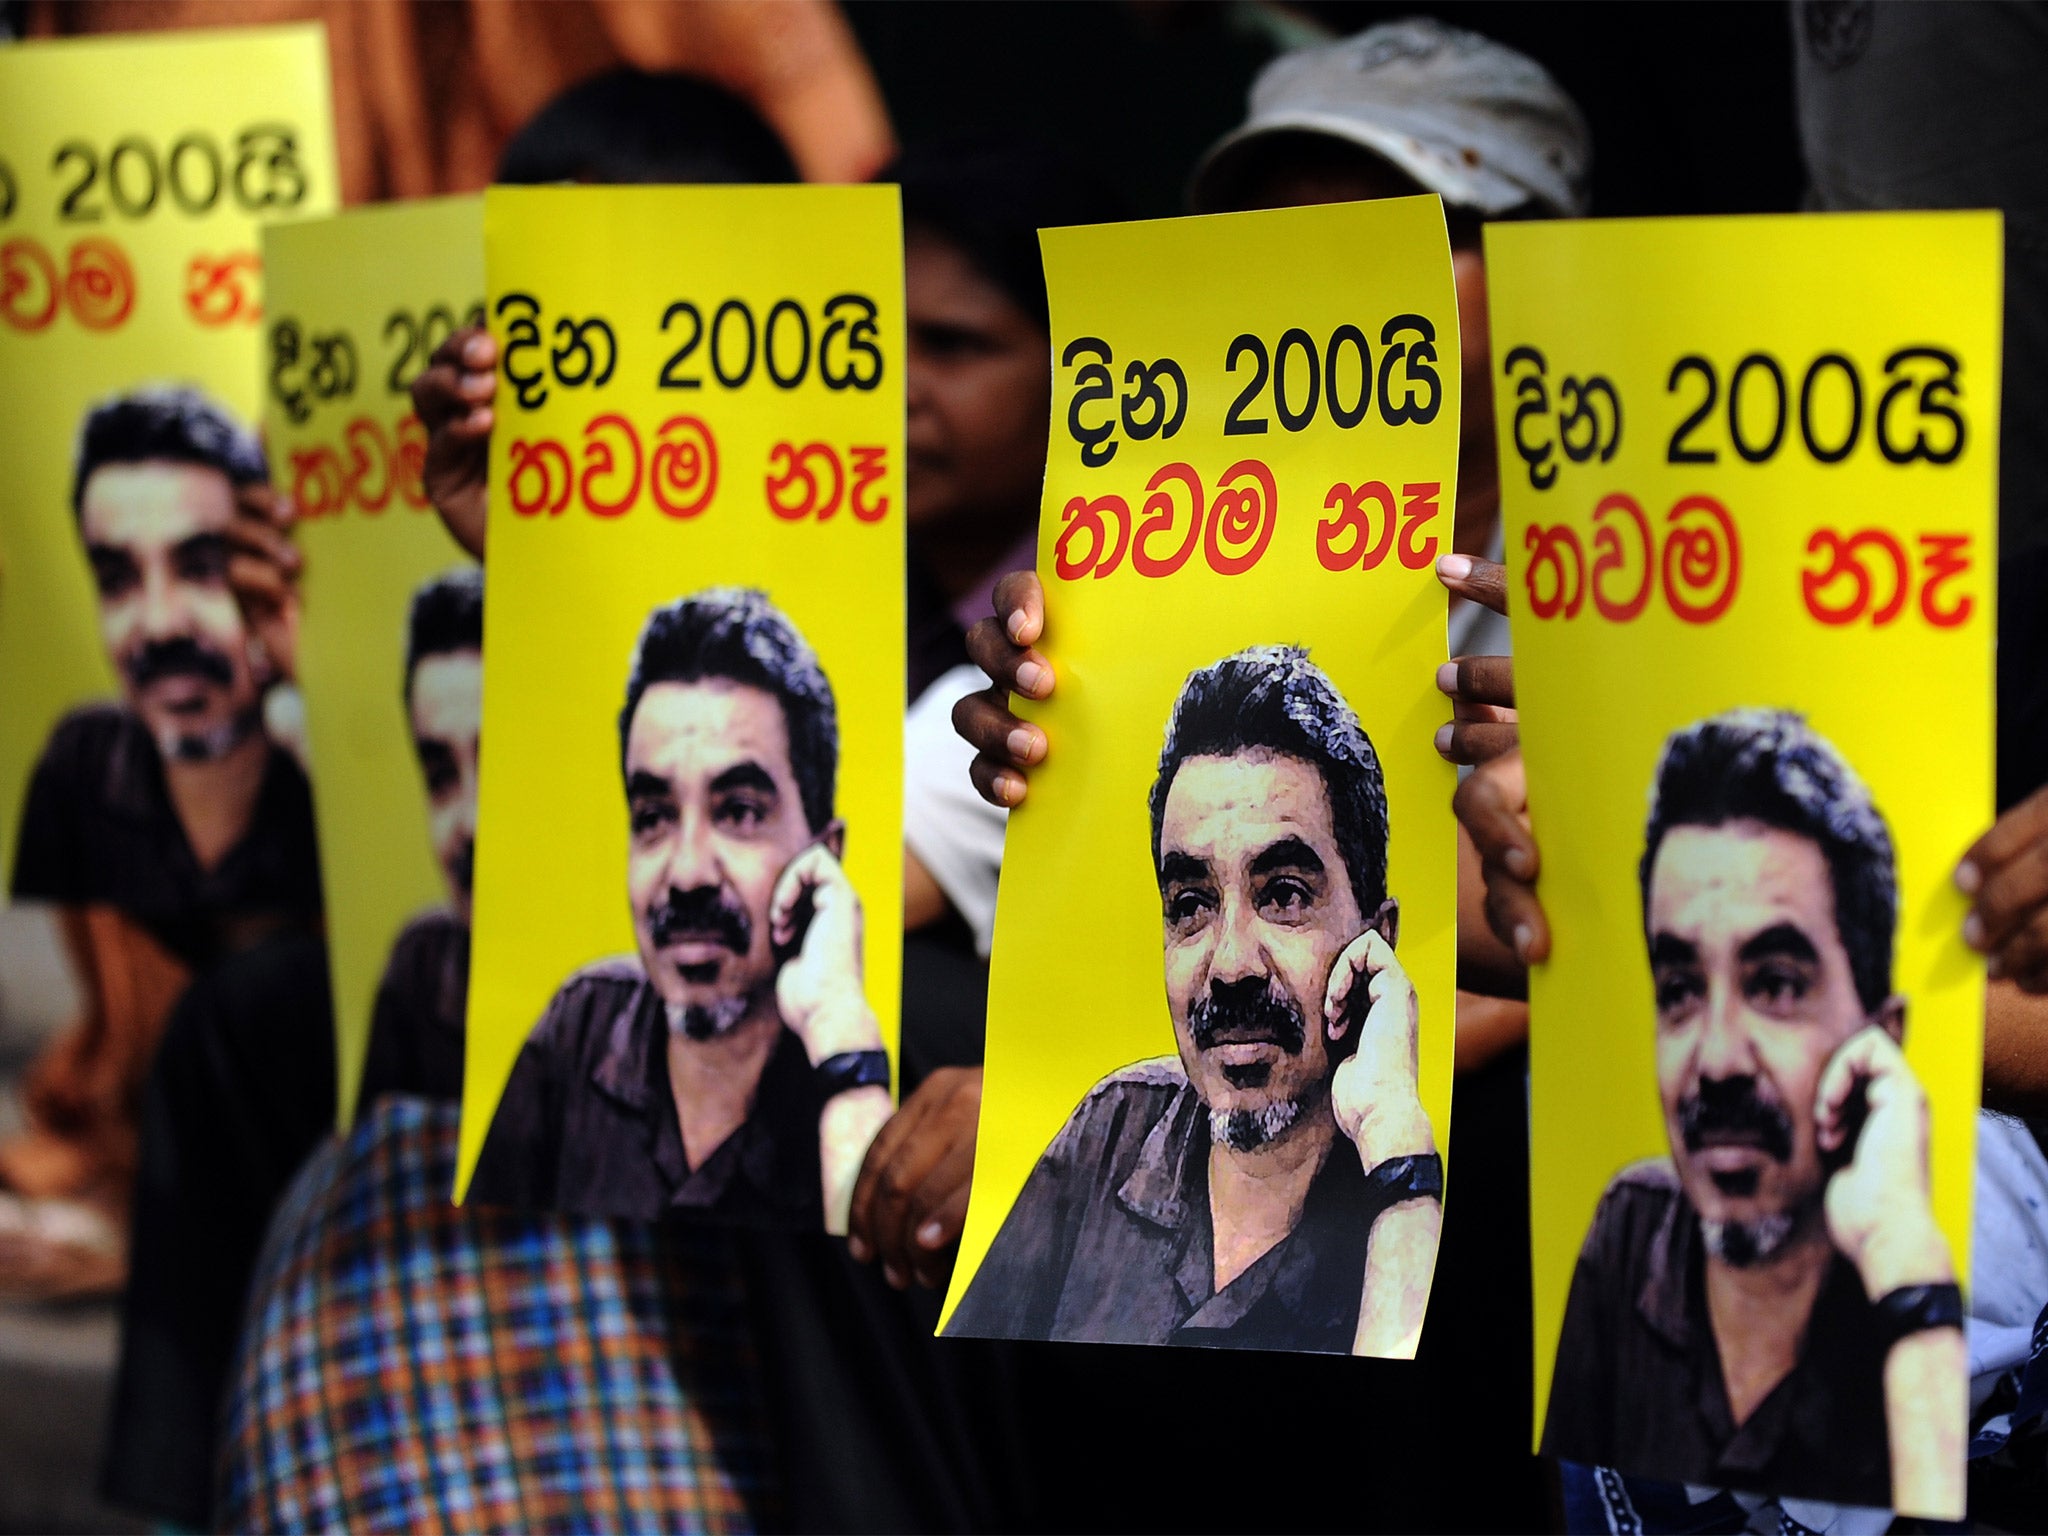 Protest held for the missing journalist in Colombo in 2010